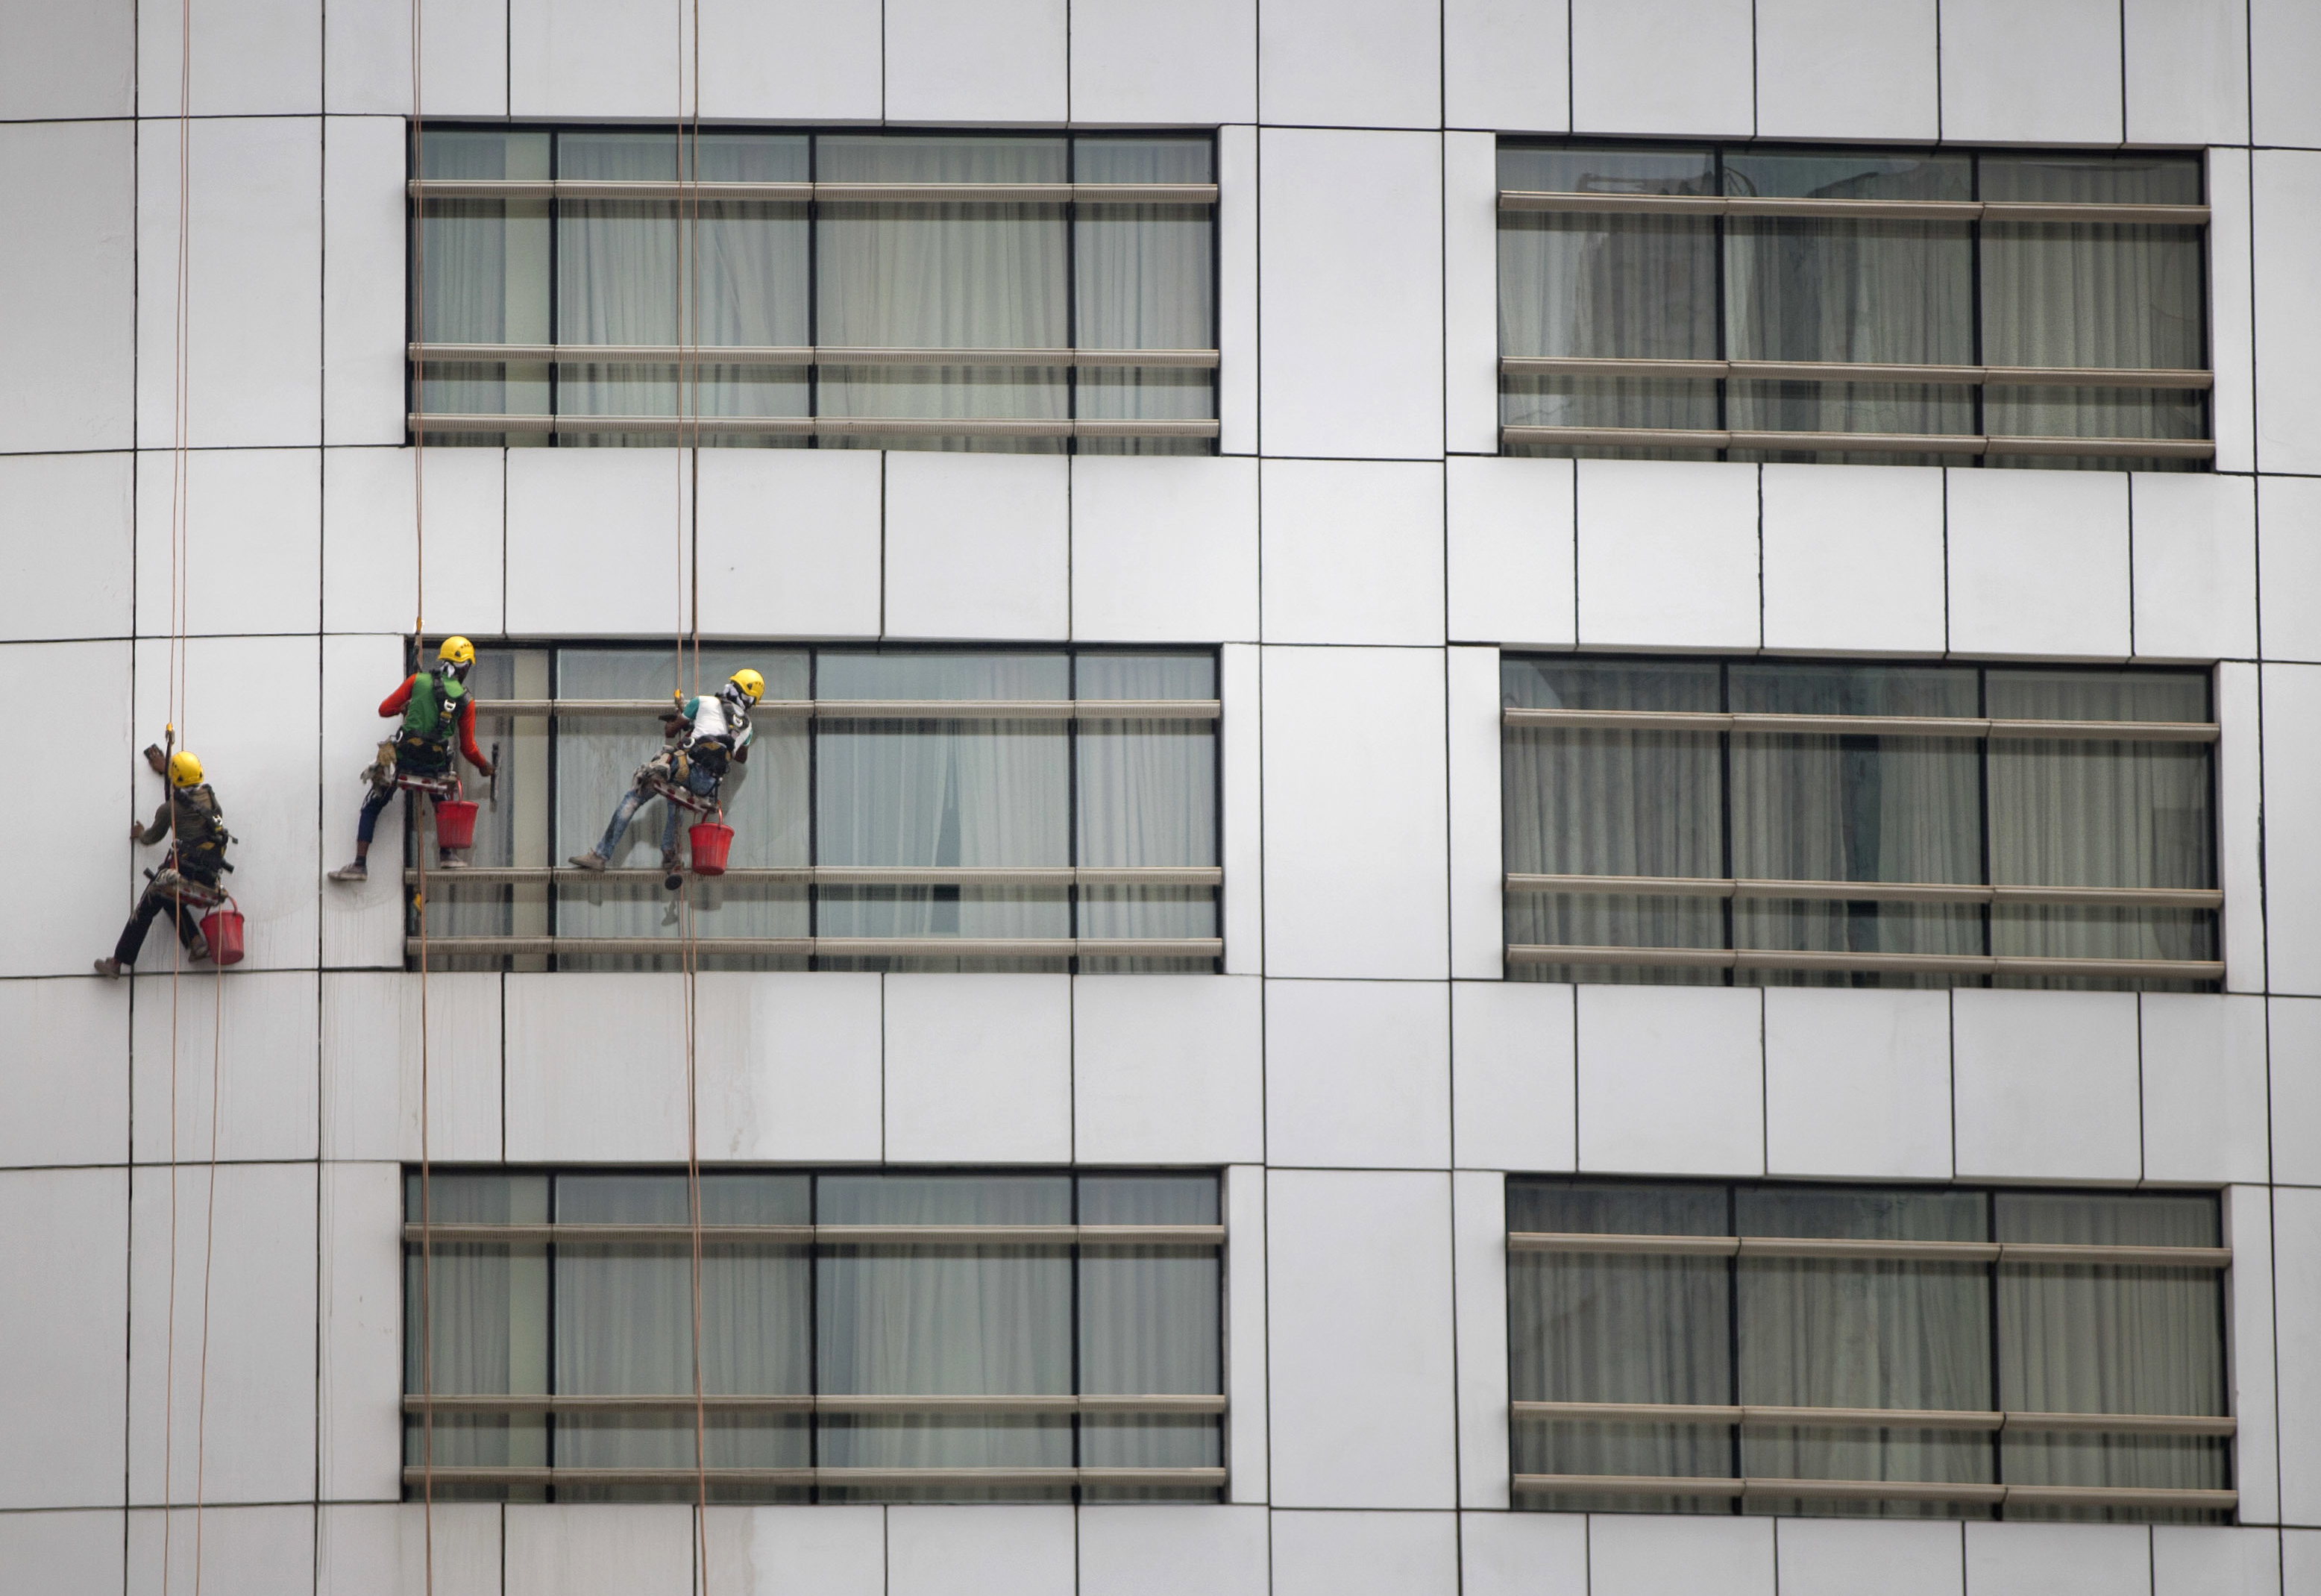 Window cleaners work on glass panes of an office building in Dhaka, Bangladesh, Saturday, March 24, 2018. On an average, each worker earns less than US$5 a day. (AP Photo/A.M. Ahad)